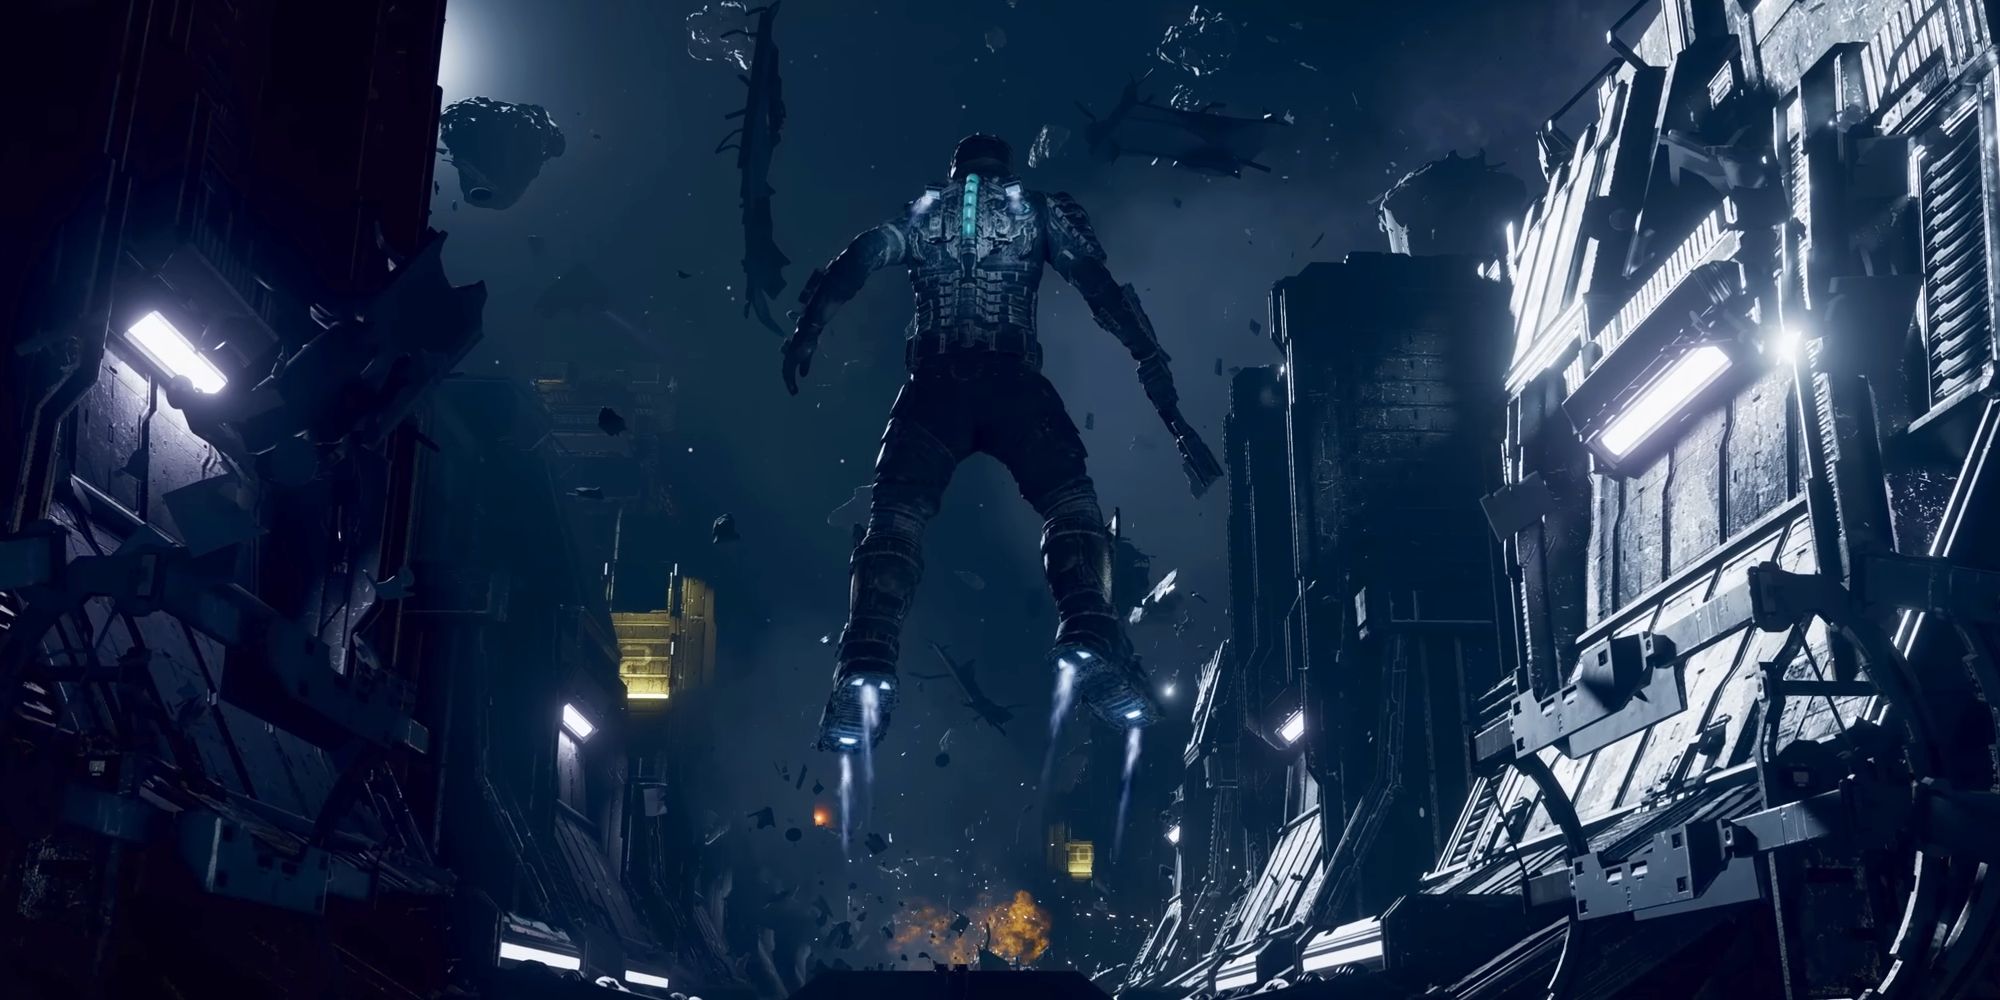 Dead Space Remake's main character Isaac is seen floating in space while wearing his engineering armor. Space debris and large metal towers surround him while an explosion can be seen in the distance.